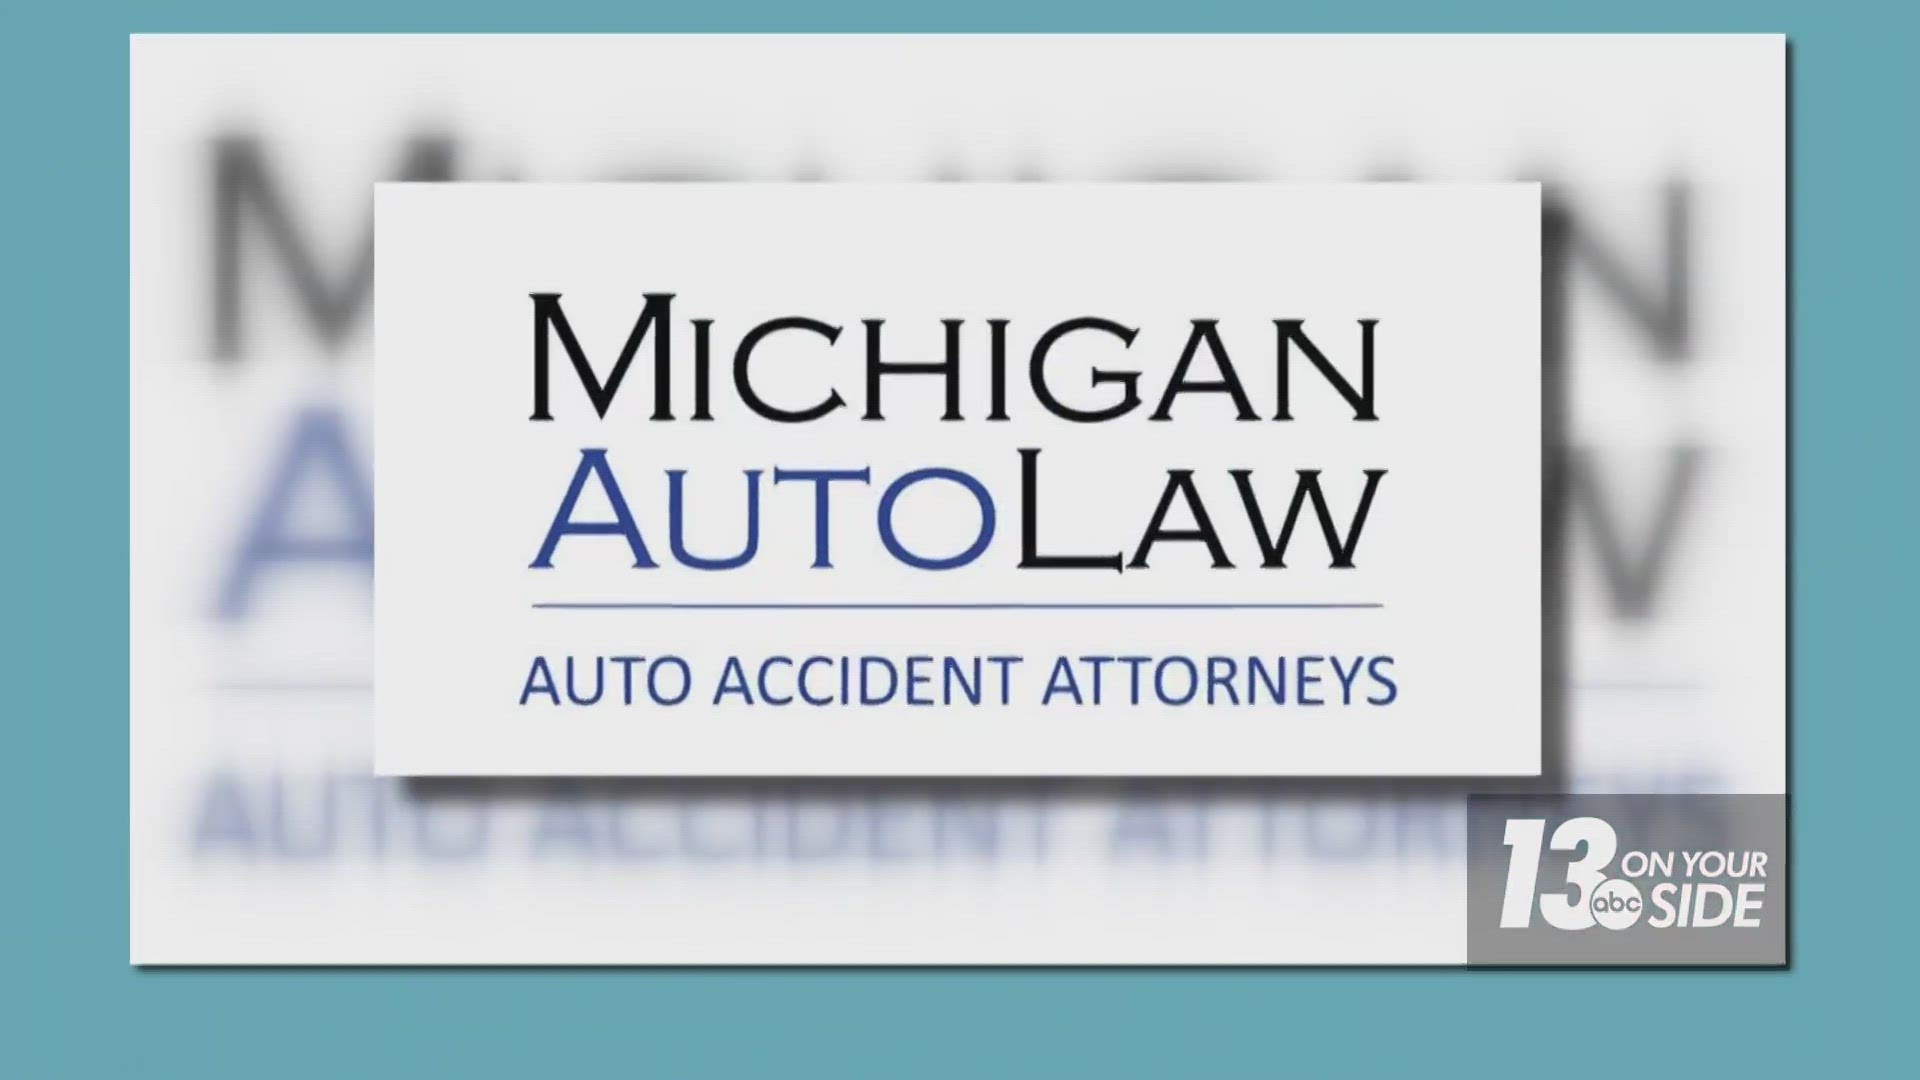 Brandon Hewitt is an attorney with Michigan Auto Law. We asked him about the new distracted driving law and how it would differ from what’s already on the books.